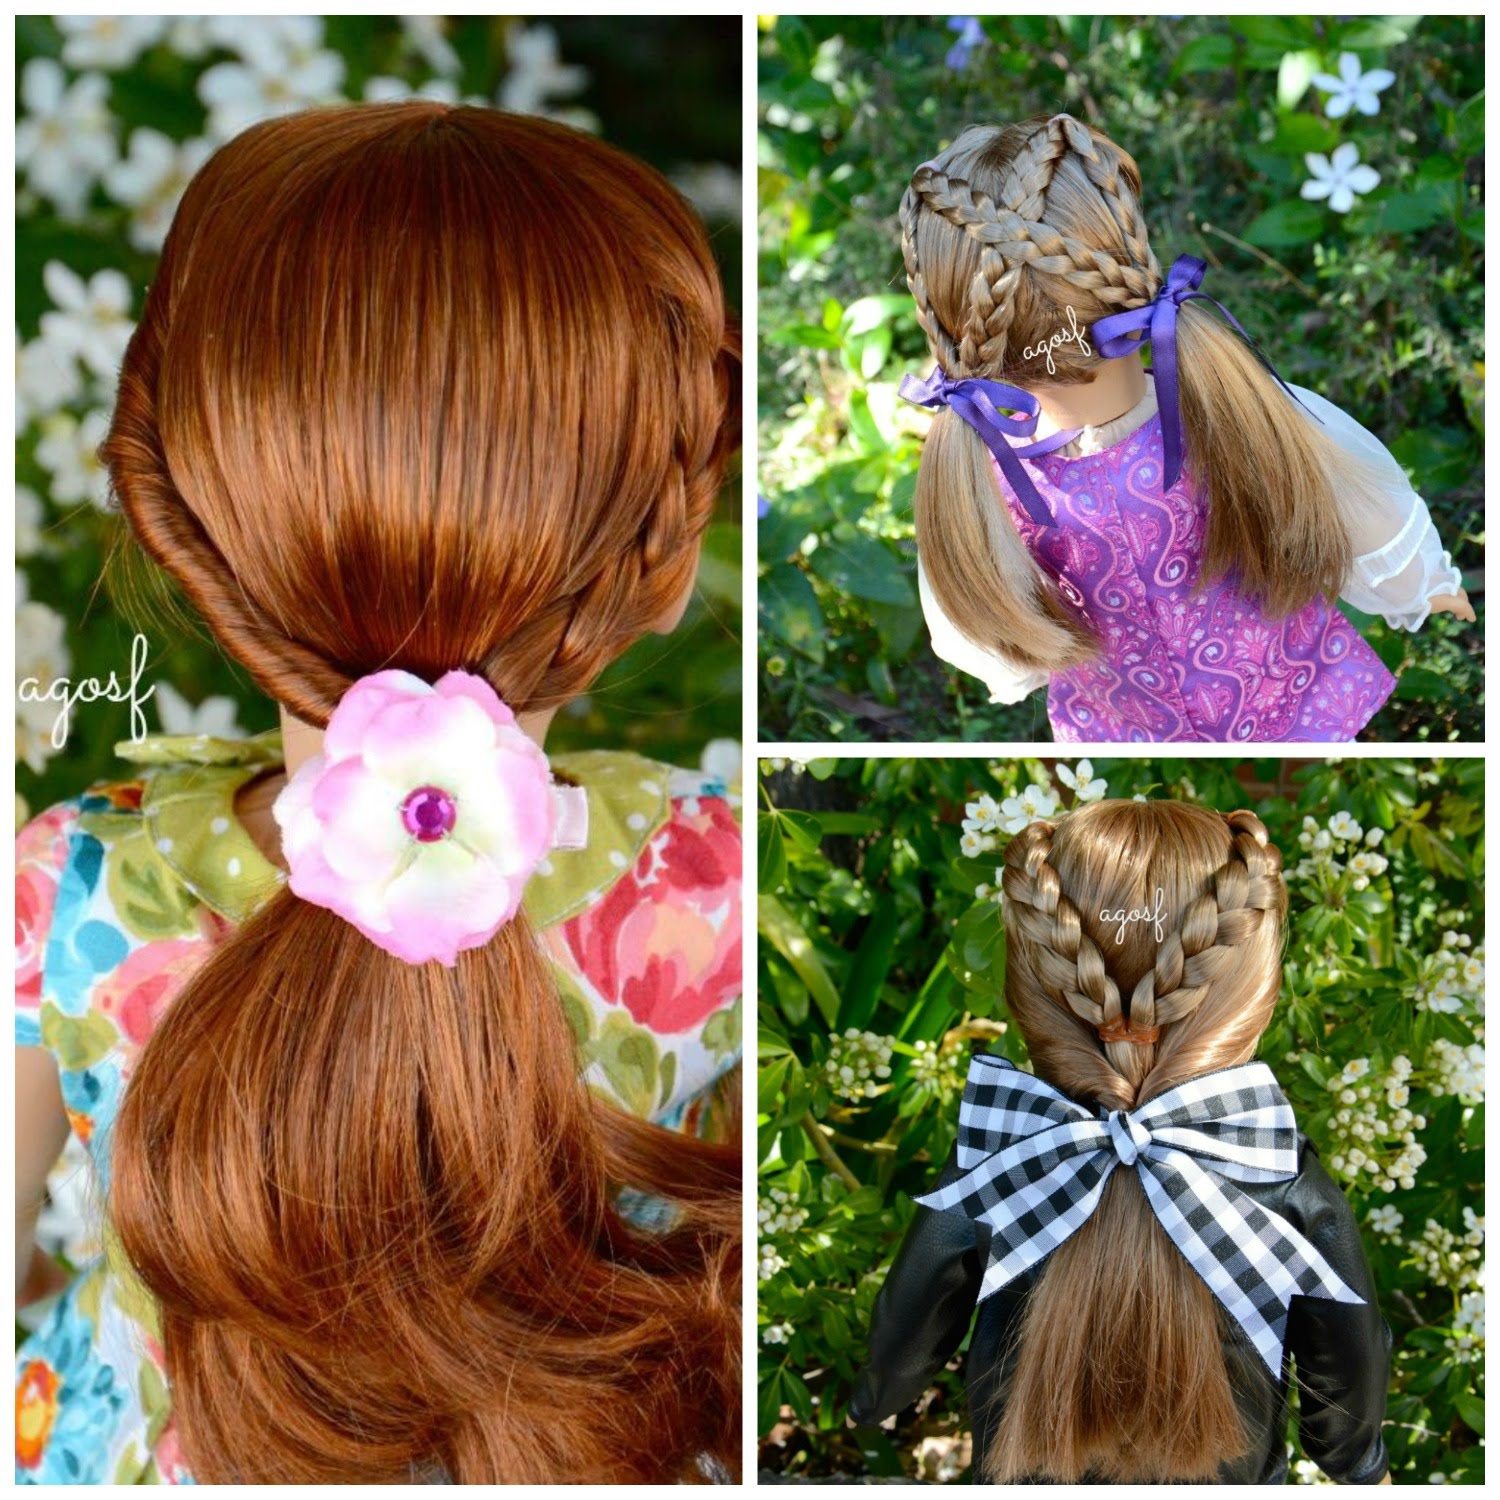 Cute American Girl Doll Hairstyles ~ trends hairstyle